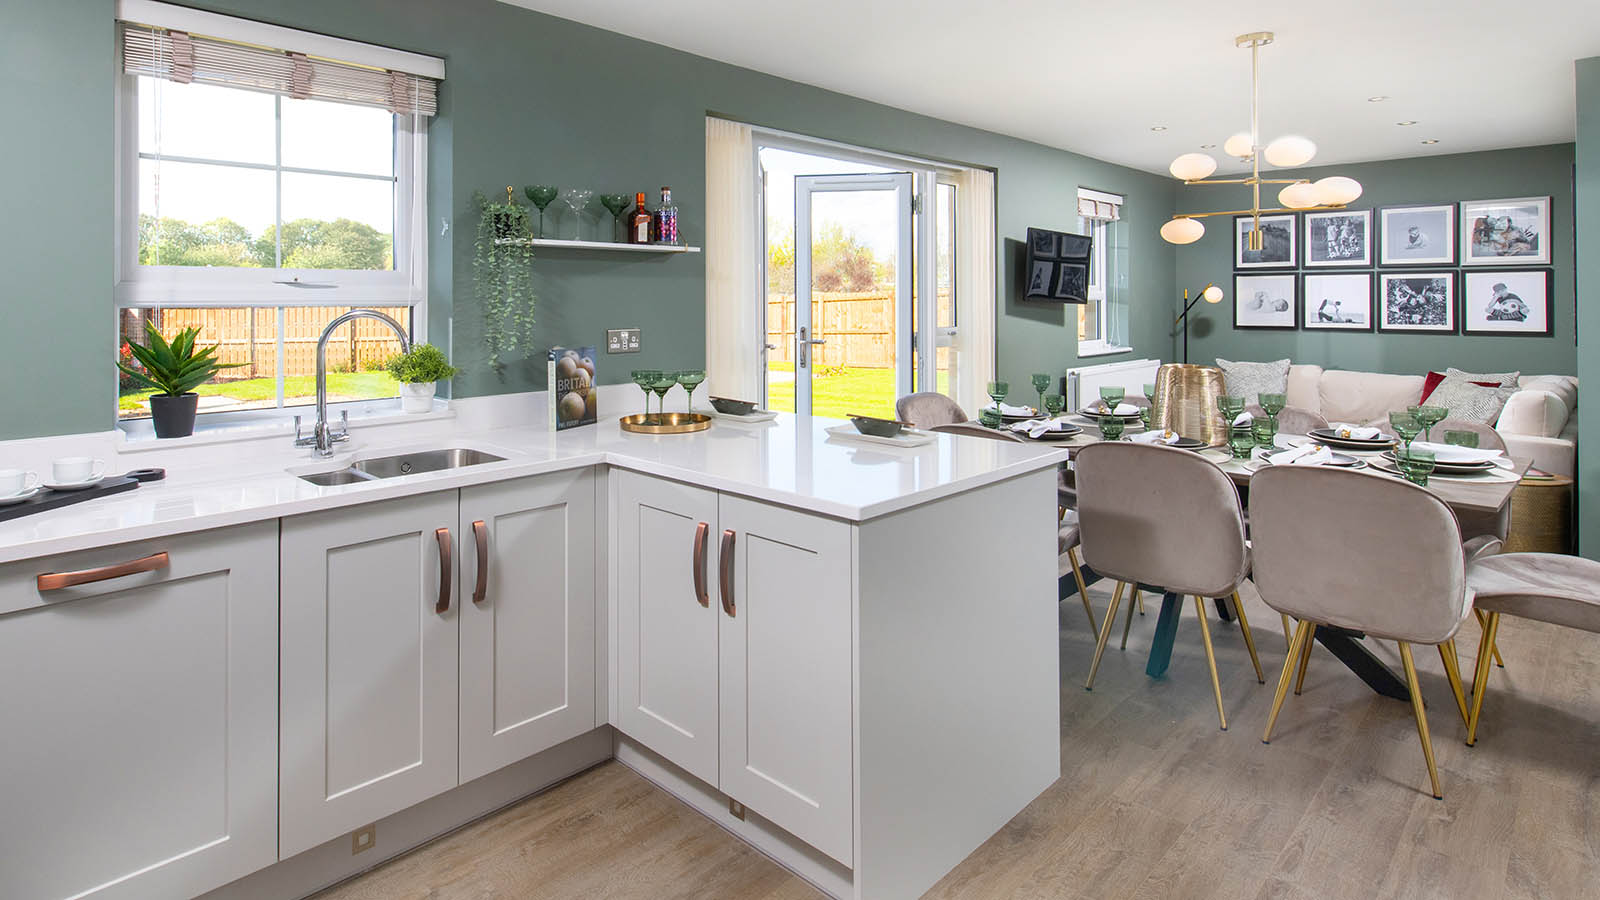 The ‘Lamberton’ show home at Sycamore Grove